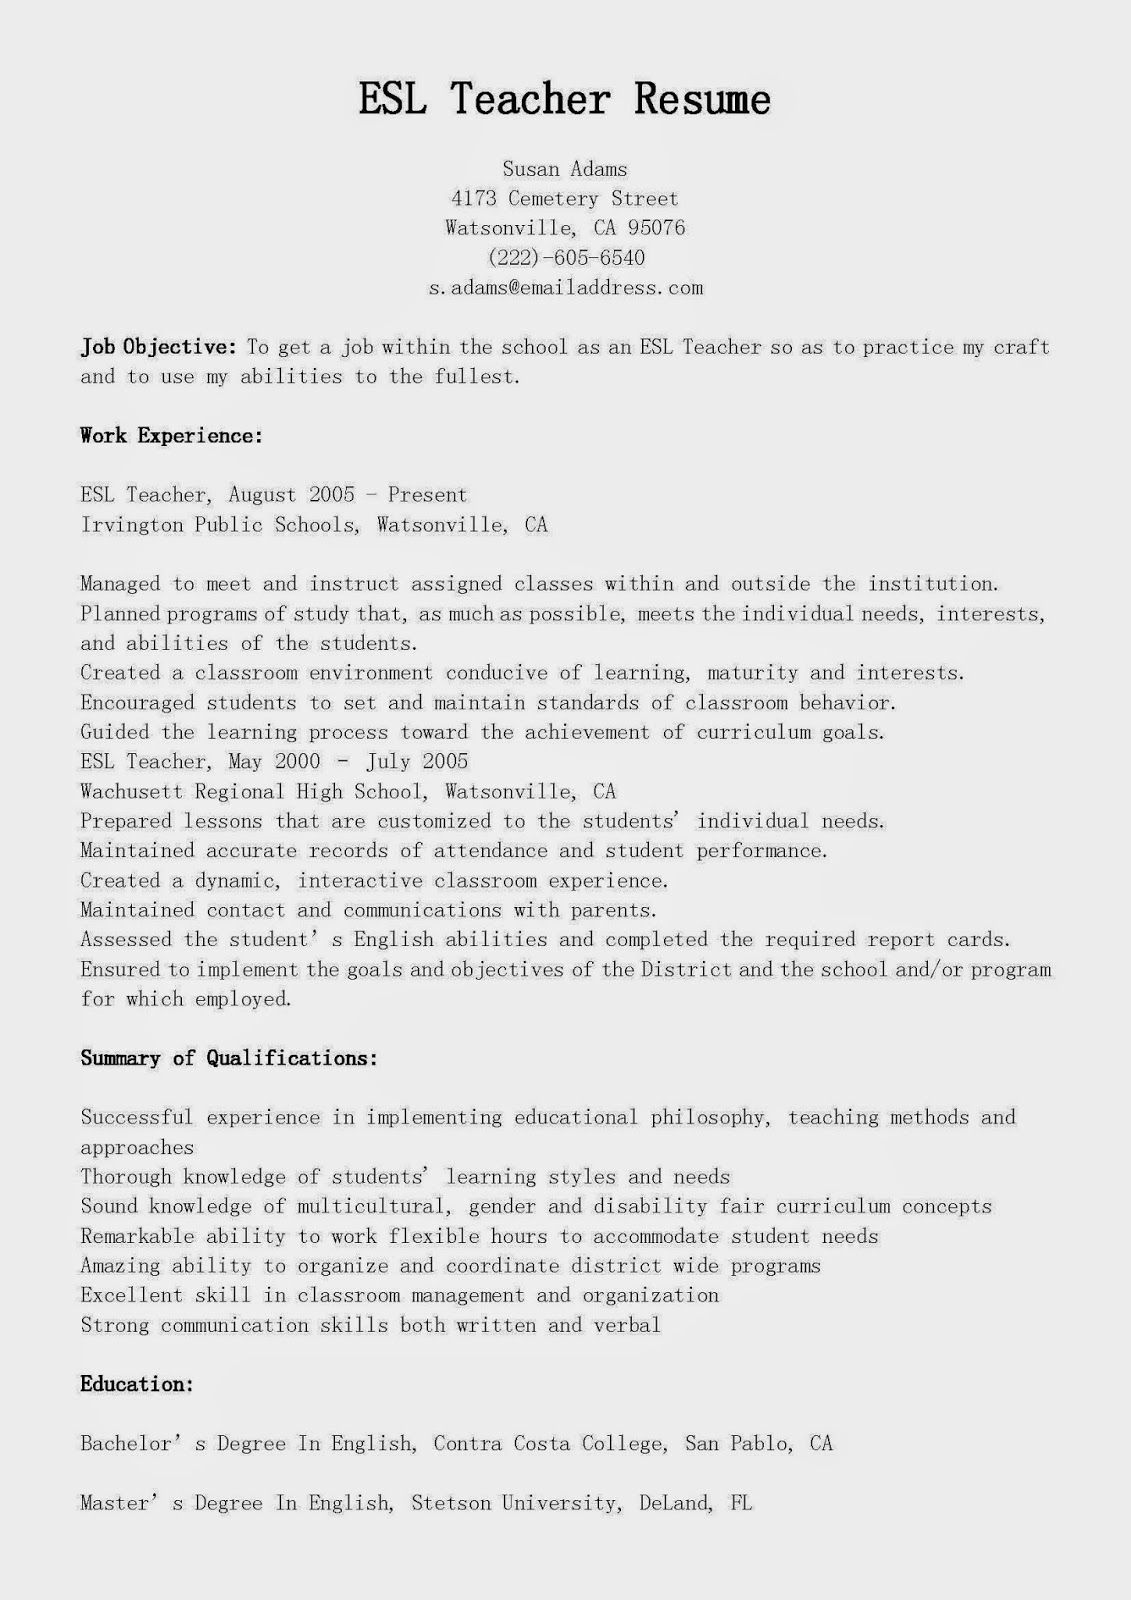 Cover letter examples for residential youth counselor